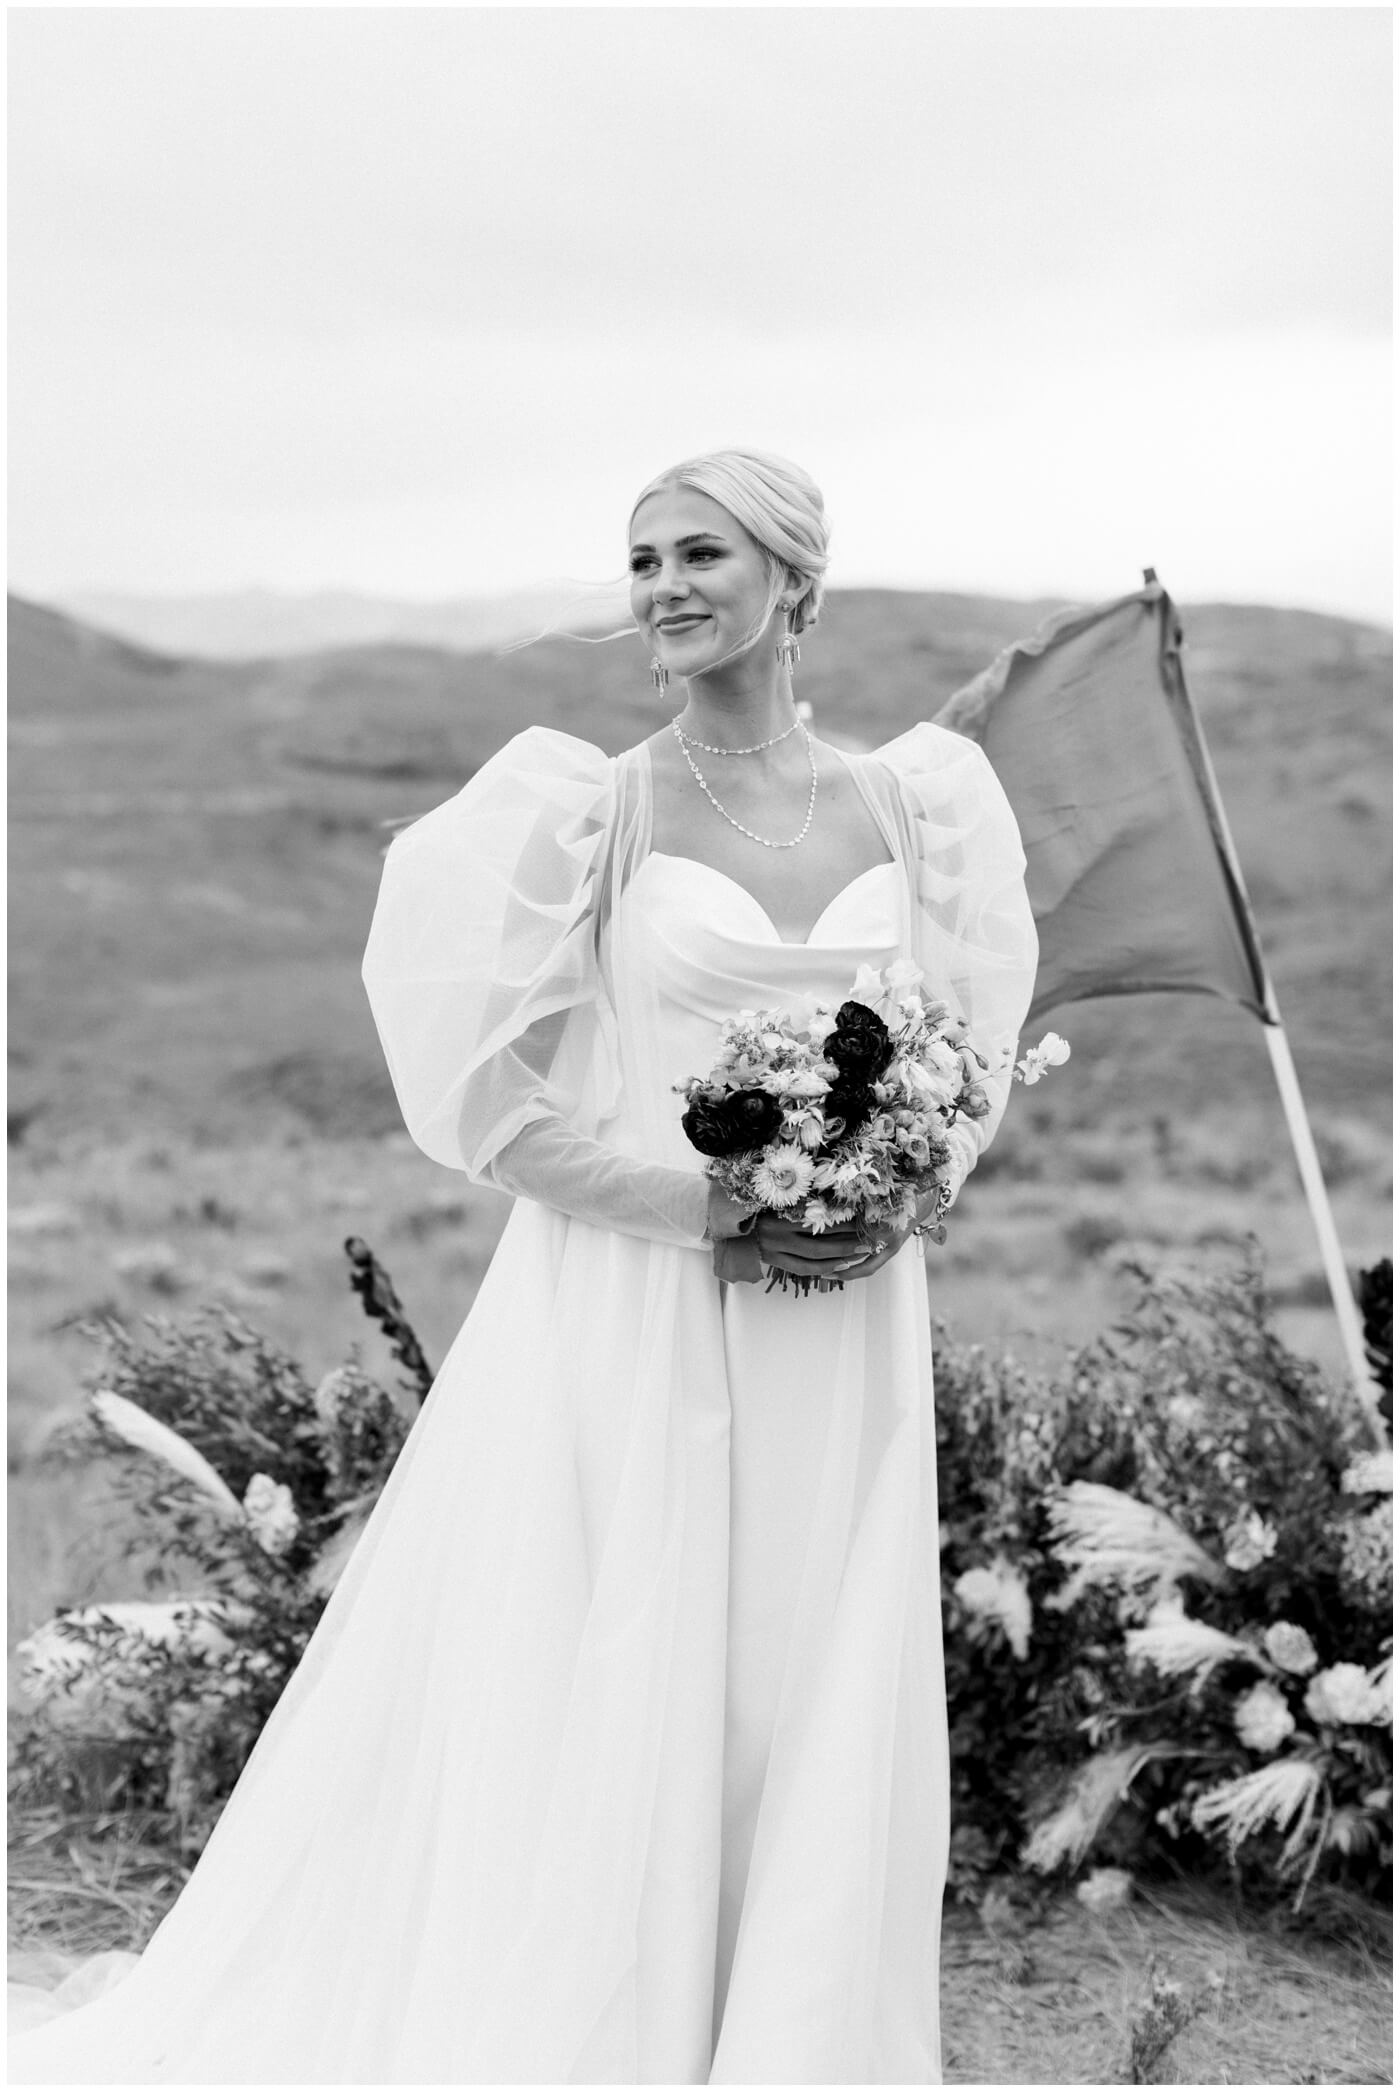 Wedding in the mountains | A bride smiles holding flowers on her wedding day 